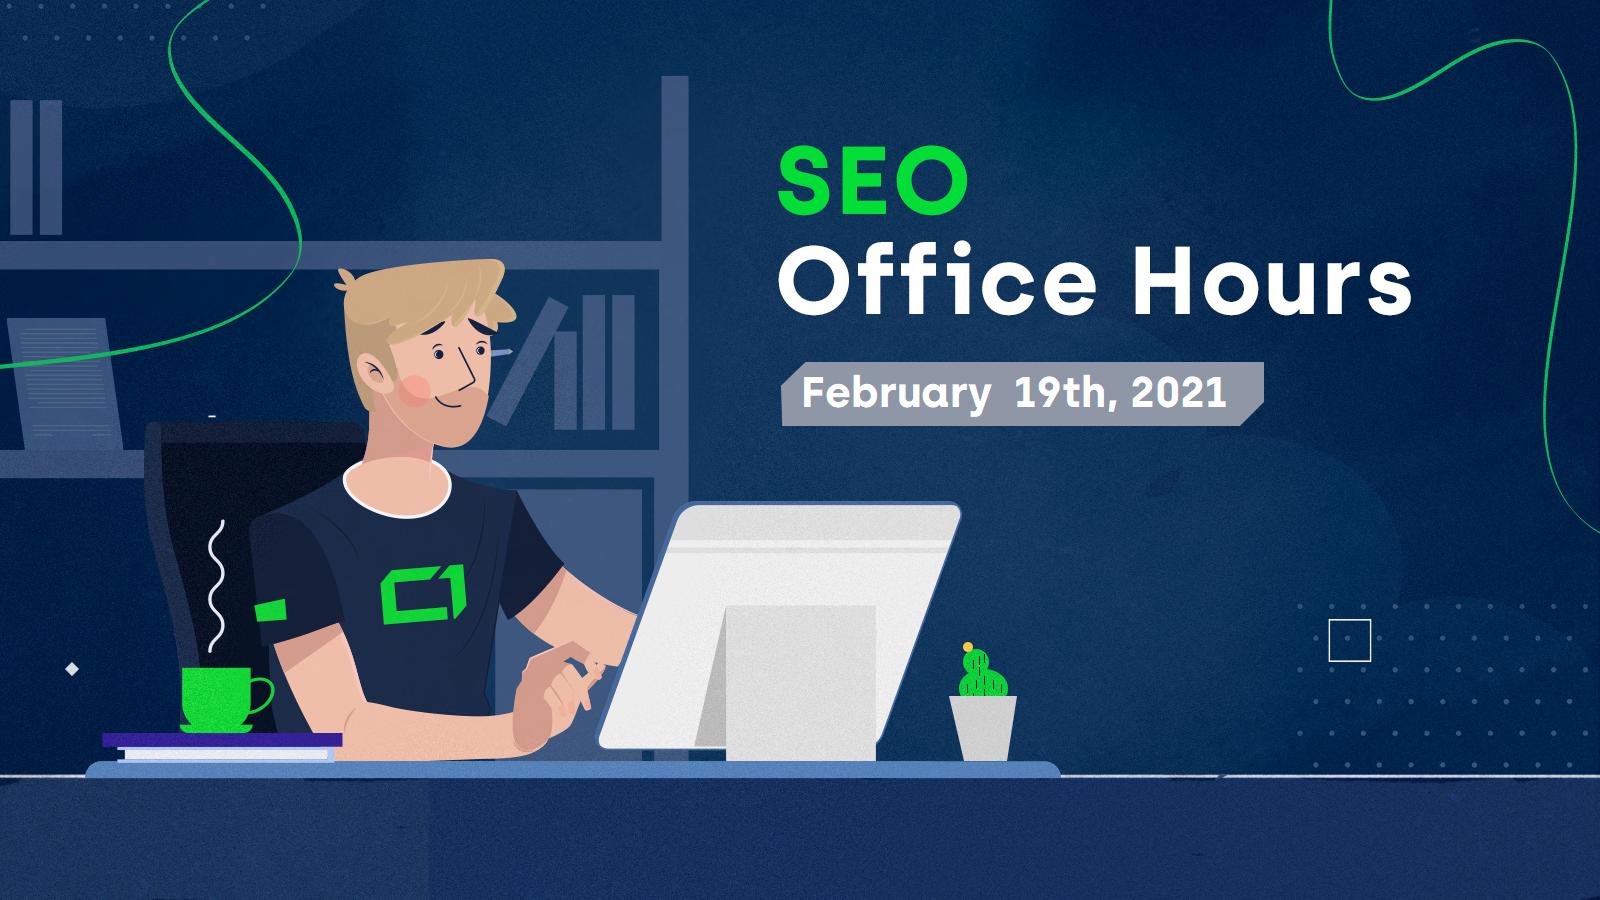 SEO Office Hours on February 19th, 2021 - Hero Image